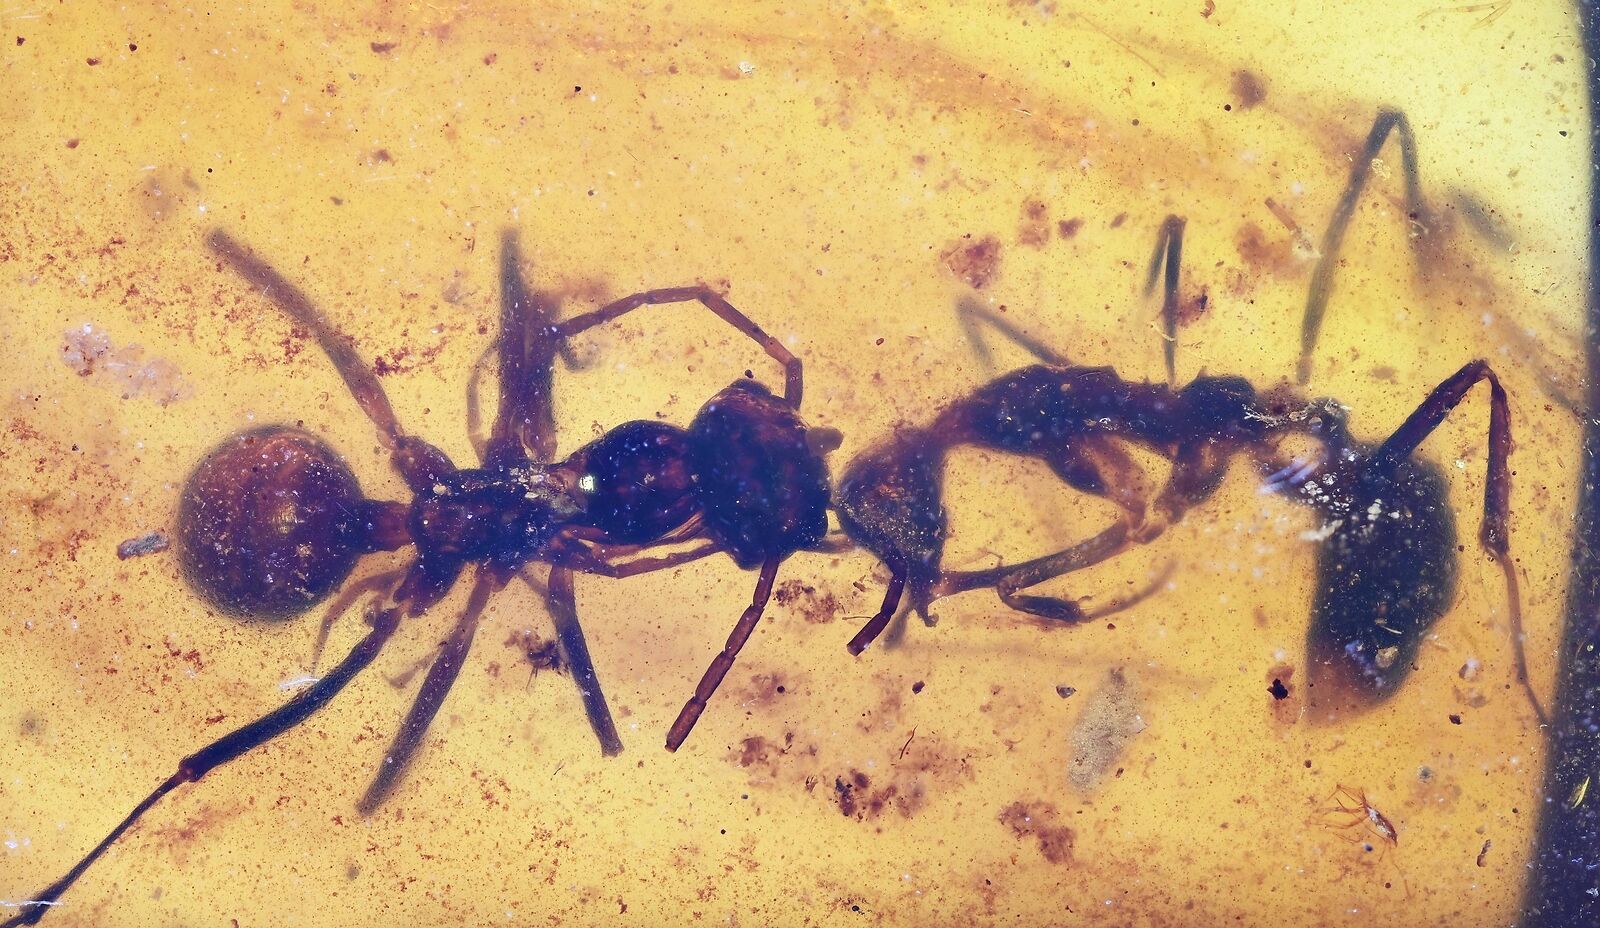 Ants Helping each other out of resin), inclusion in Burmese Amber